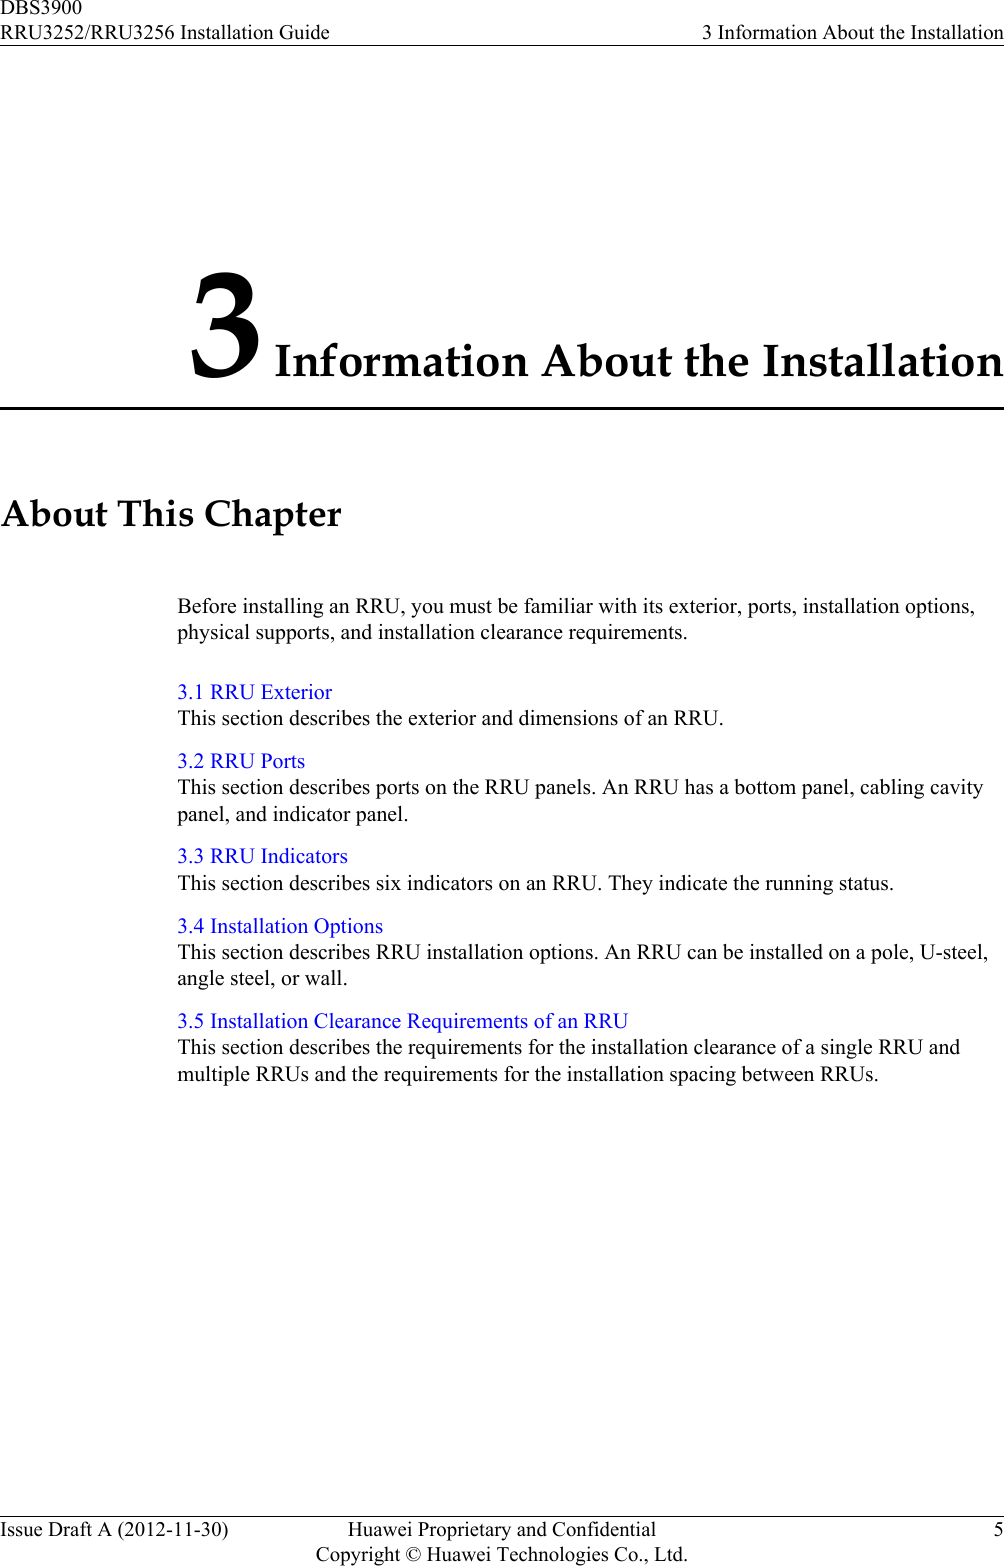 3 Information About the InstallationAbout This ChapterBefore installing an RRU, you must be familiar with its exterior, ports, installation options,physical supports, and installation clearance requirements.3.1 RRU ExteriorThis section describes the exterior and dimensions of an RRU.3.2 RRU PortsThis section describes ports on the RRU panels. An RRU has a bottom panel, cabling cavitypanel, and indicator panel.3.3 RRU IndicatorsThis section describes six indicators on an RRU. They indicate the running status.3.4 Installation OptionsThis section describes RRU installation options. An RRU can be installed on a pole, U-steel,angle steel, or wall.3.5 Installation Clearance Requirements of an RRUThis section describes the requirements for the installation clearance of a single RRU andmultiple RRUs and the requirements for the installation spacing between RRUs.DBS3900RRU3252/RRU3256 Installation Guide 3 Information About the InstallationIssue Draft A (2012-11-30) Huawei Proprietary and ConfidentialCopyright © Huawei Technologies Co., Ltd.5